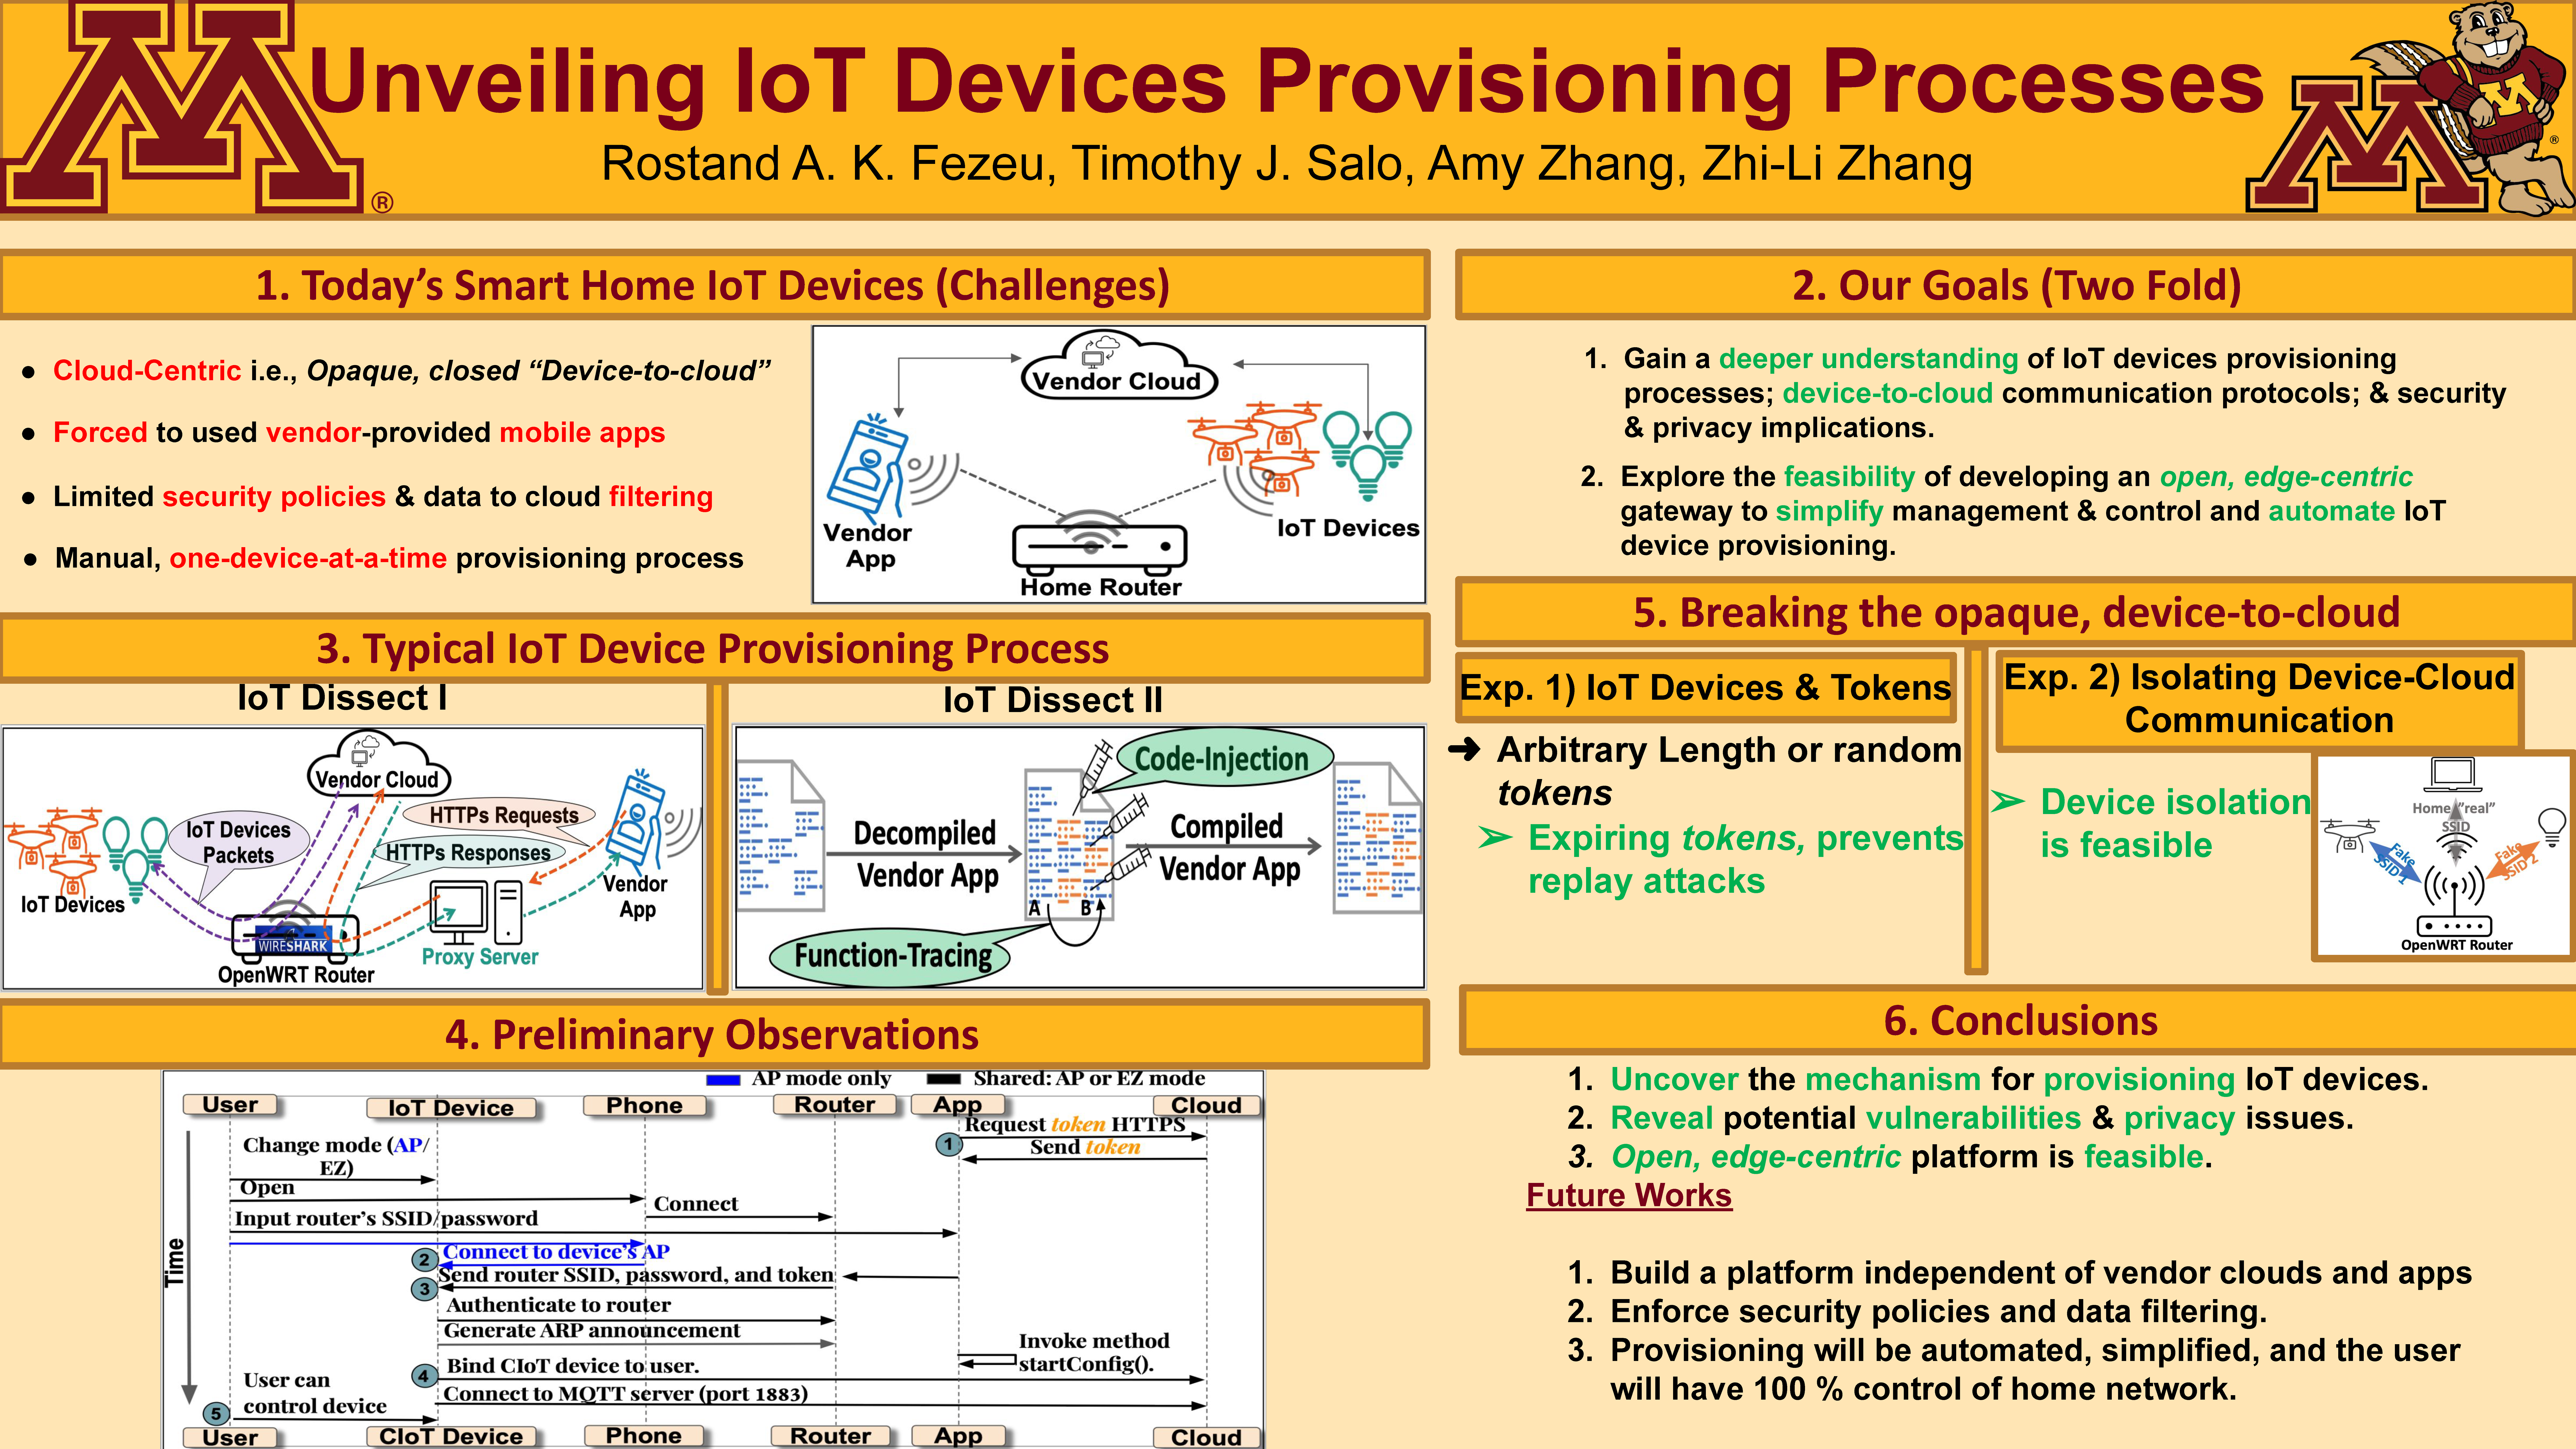 Unveiling IoT Devices Provisioning Processes poster